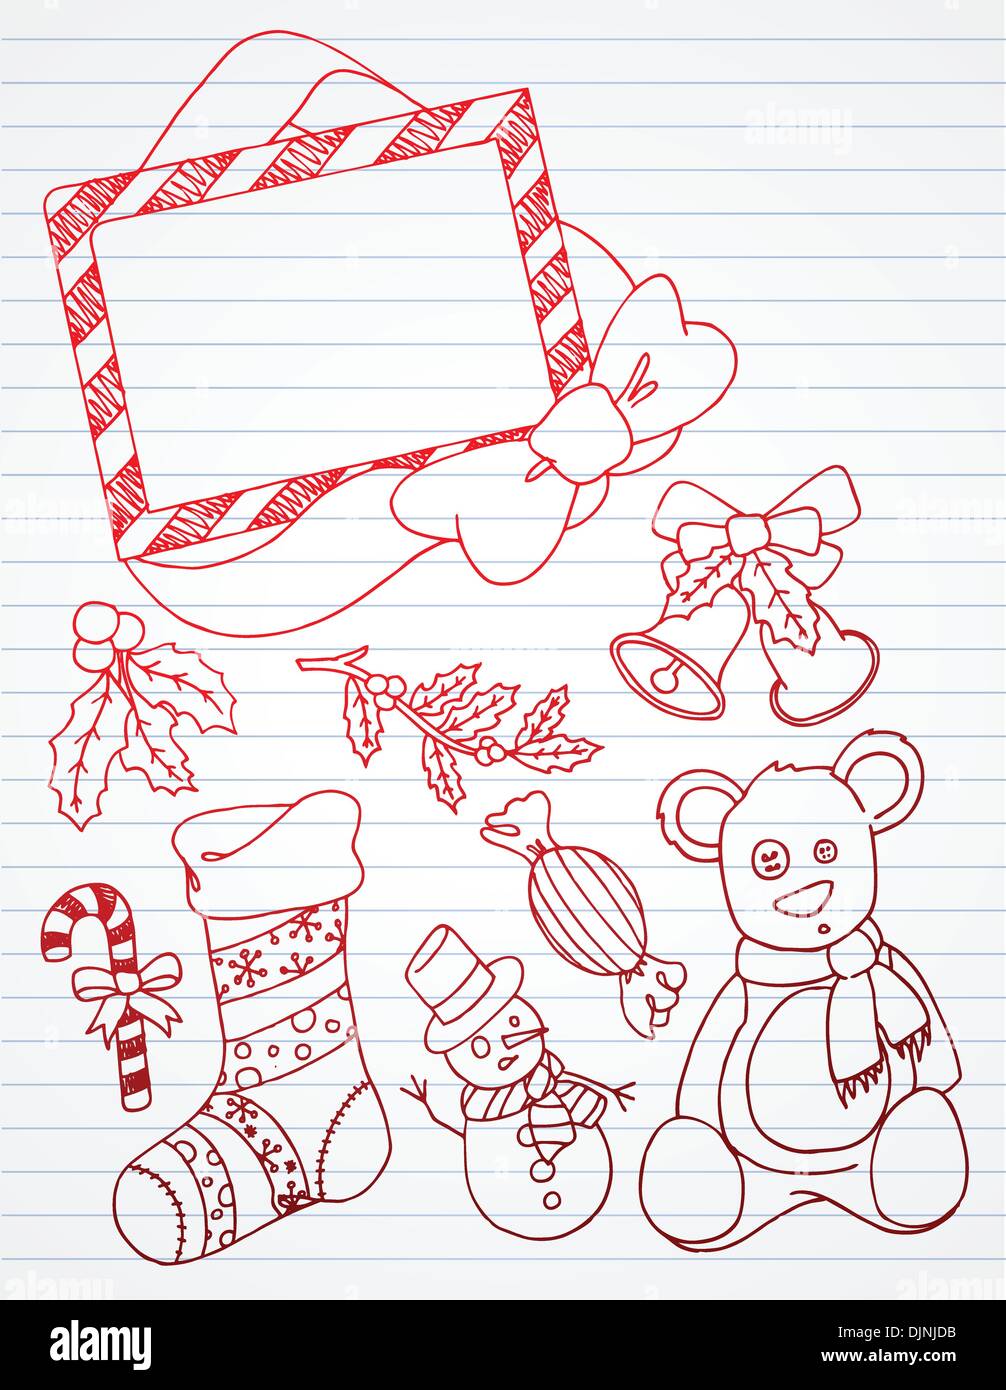 Große Weihnachts doodles in rot. Stock Vektor